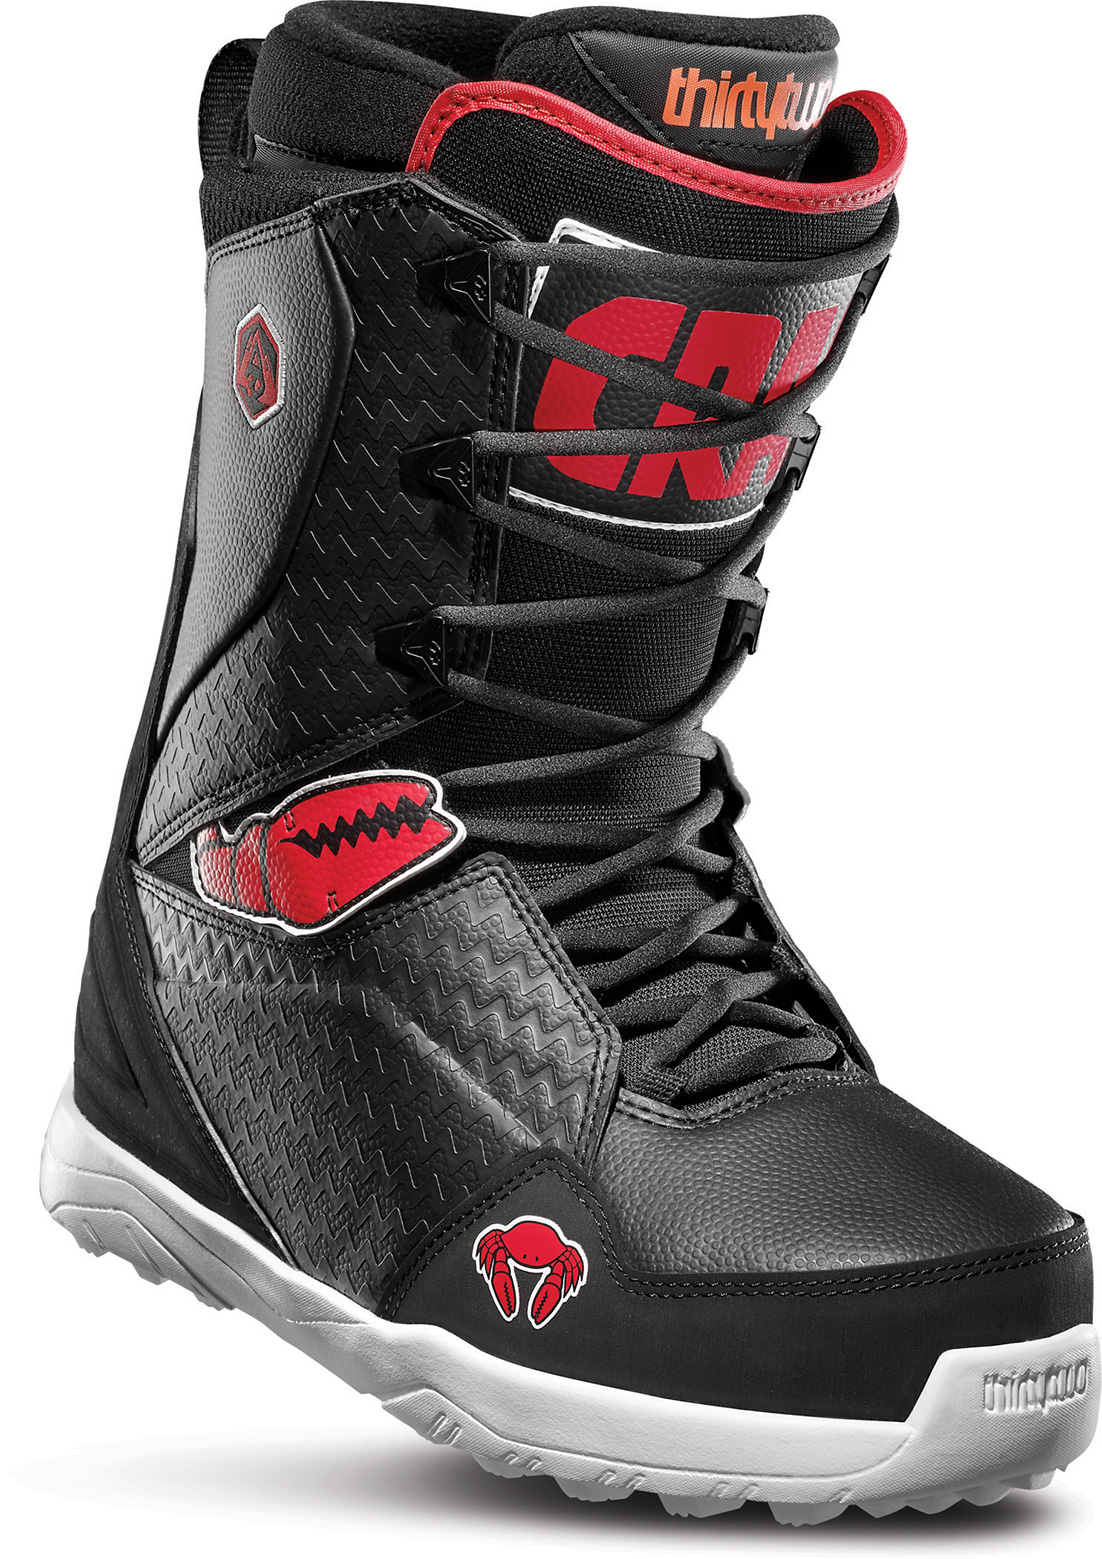 Boots de Snowboard Lashed Crab Grab - Black Red White